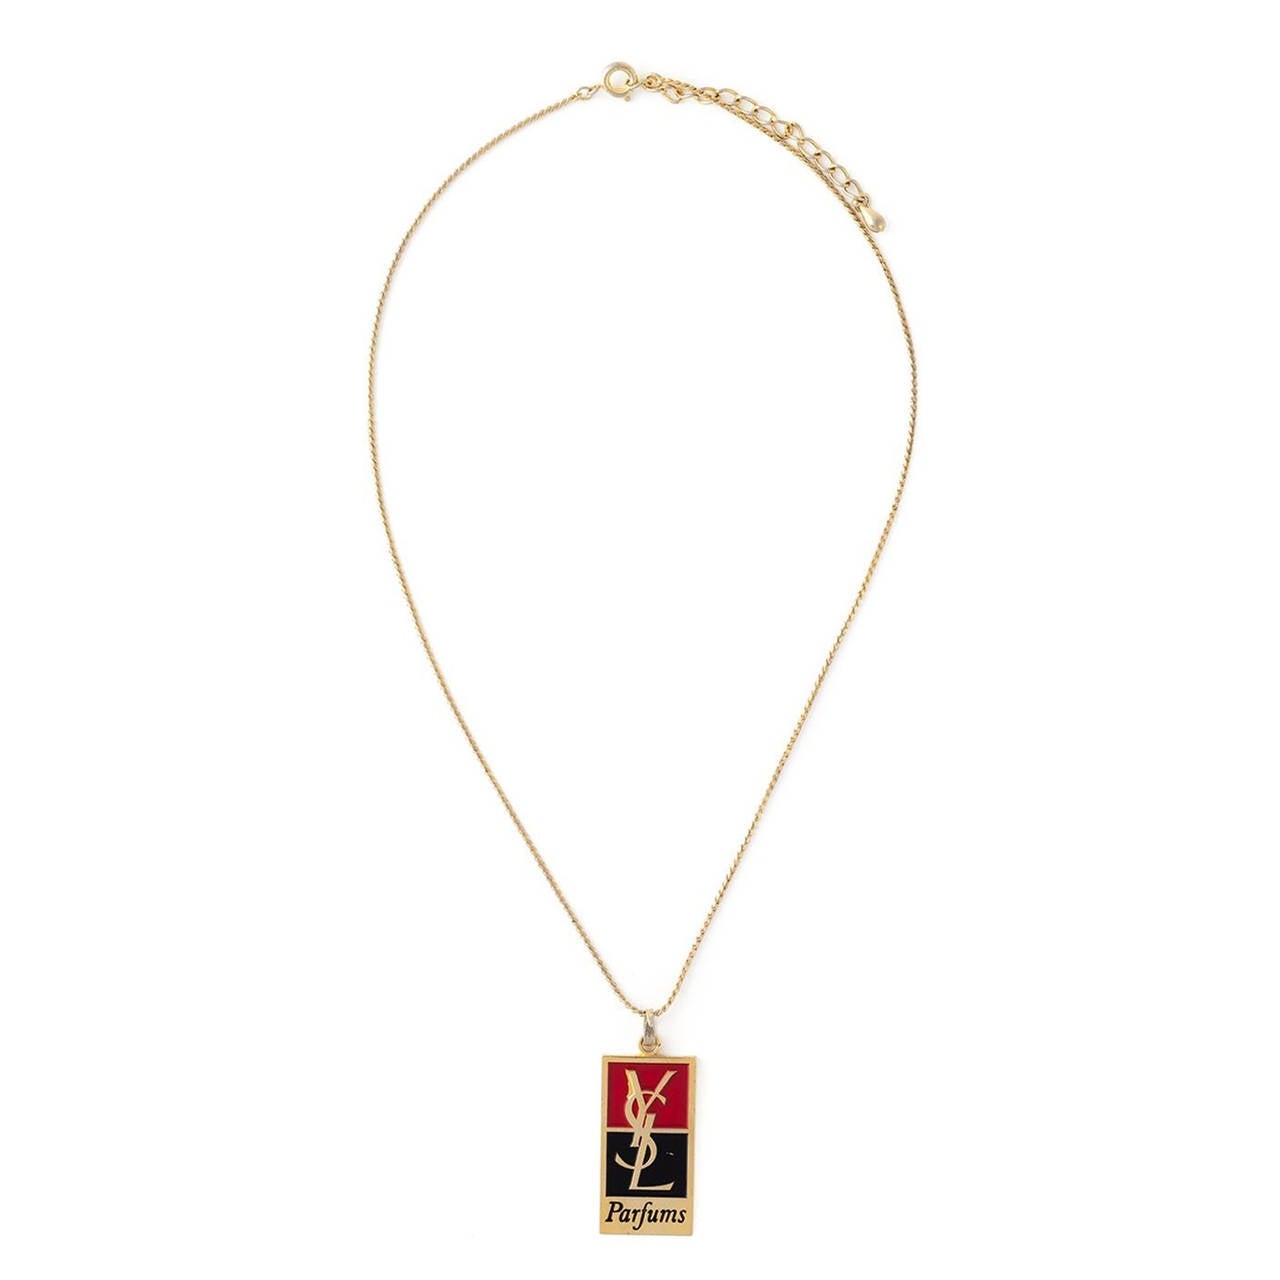 This vintage YSL necklace features a Gold-tone, Red and Black Metal logo pendant, a rope chain and a torque closure.

Measurements: Length: 20cm, Pendant Length: 3cm, Pendant Width: 1.5cm

Material: Metal

Colour: Gold-tone, Red and Black